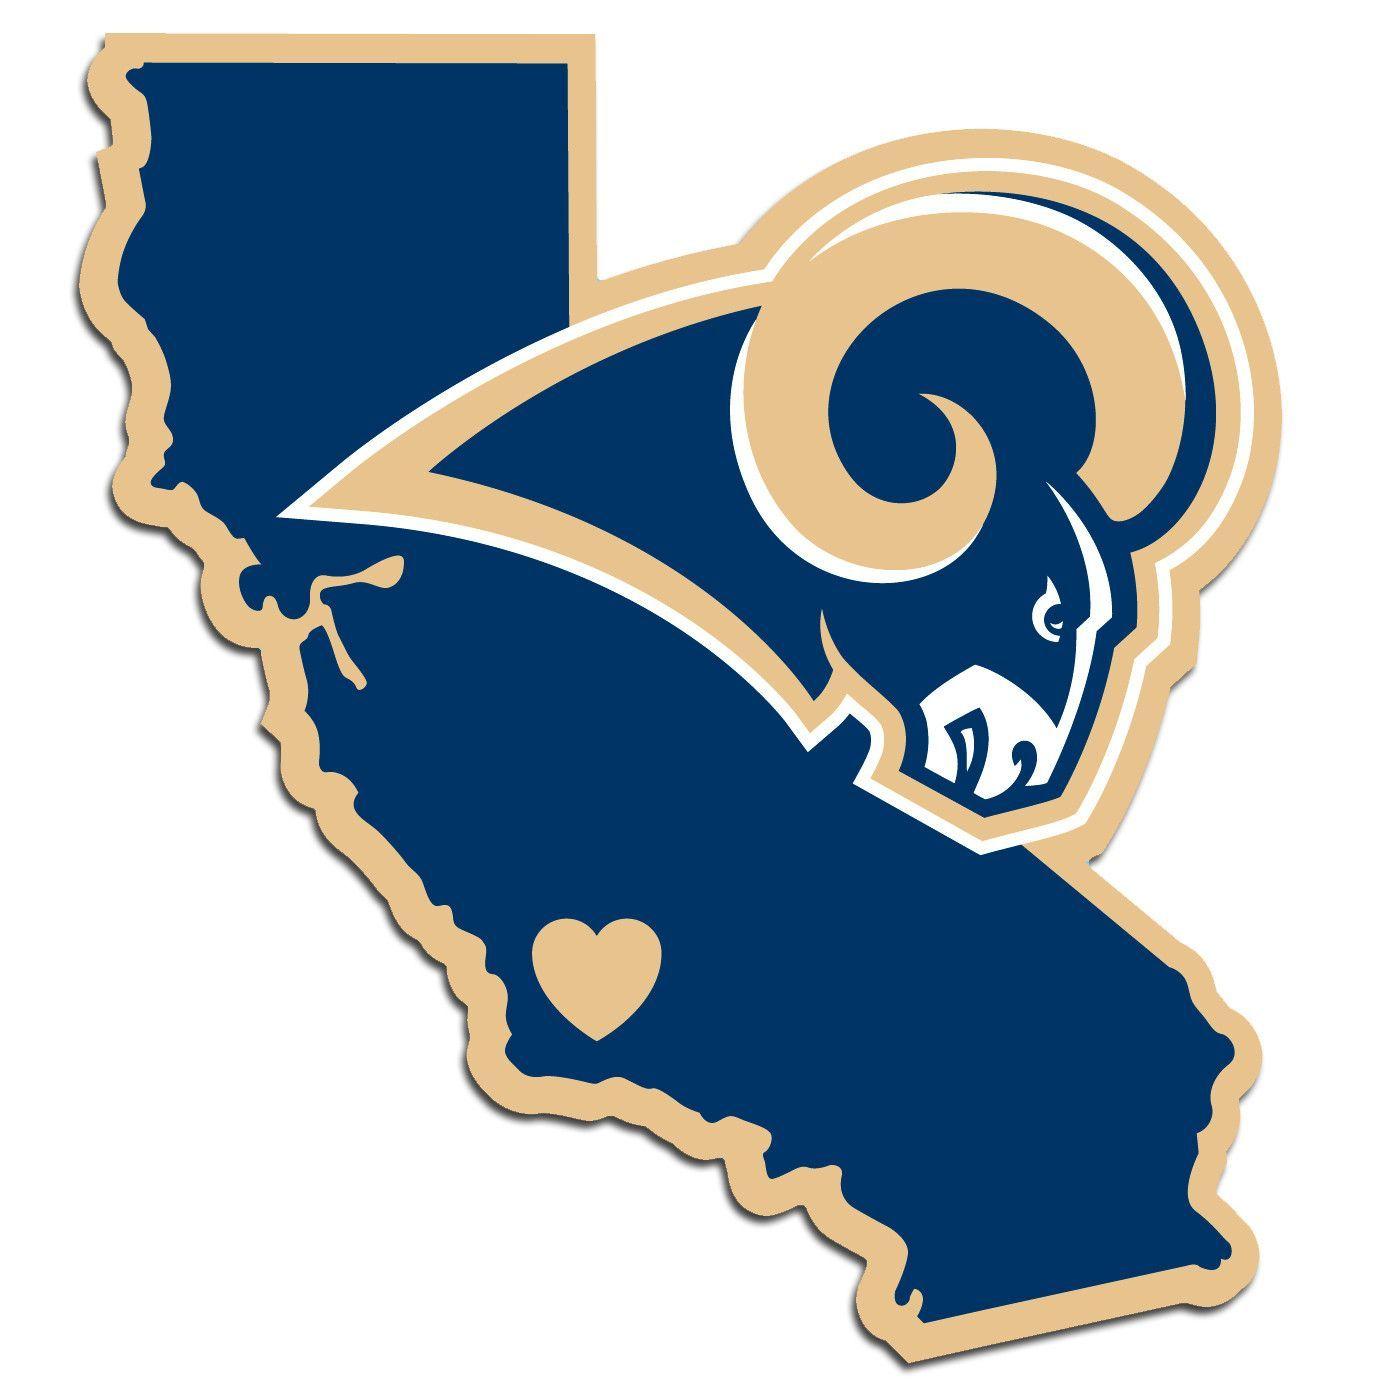 Rams Logo - It's a home state decal with a sporty twist! This Los Angeles Rams ...